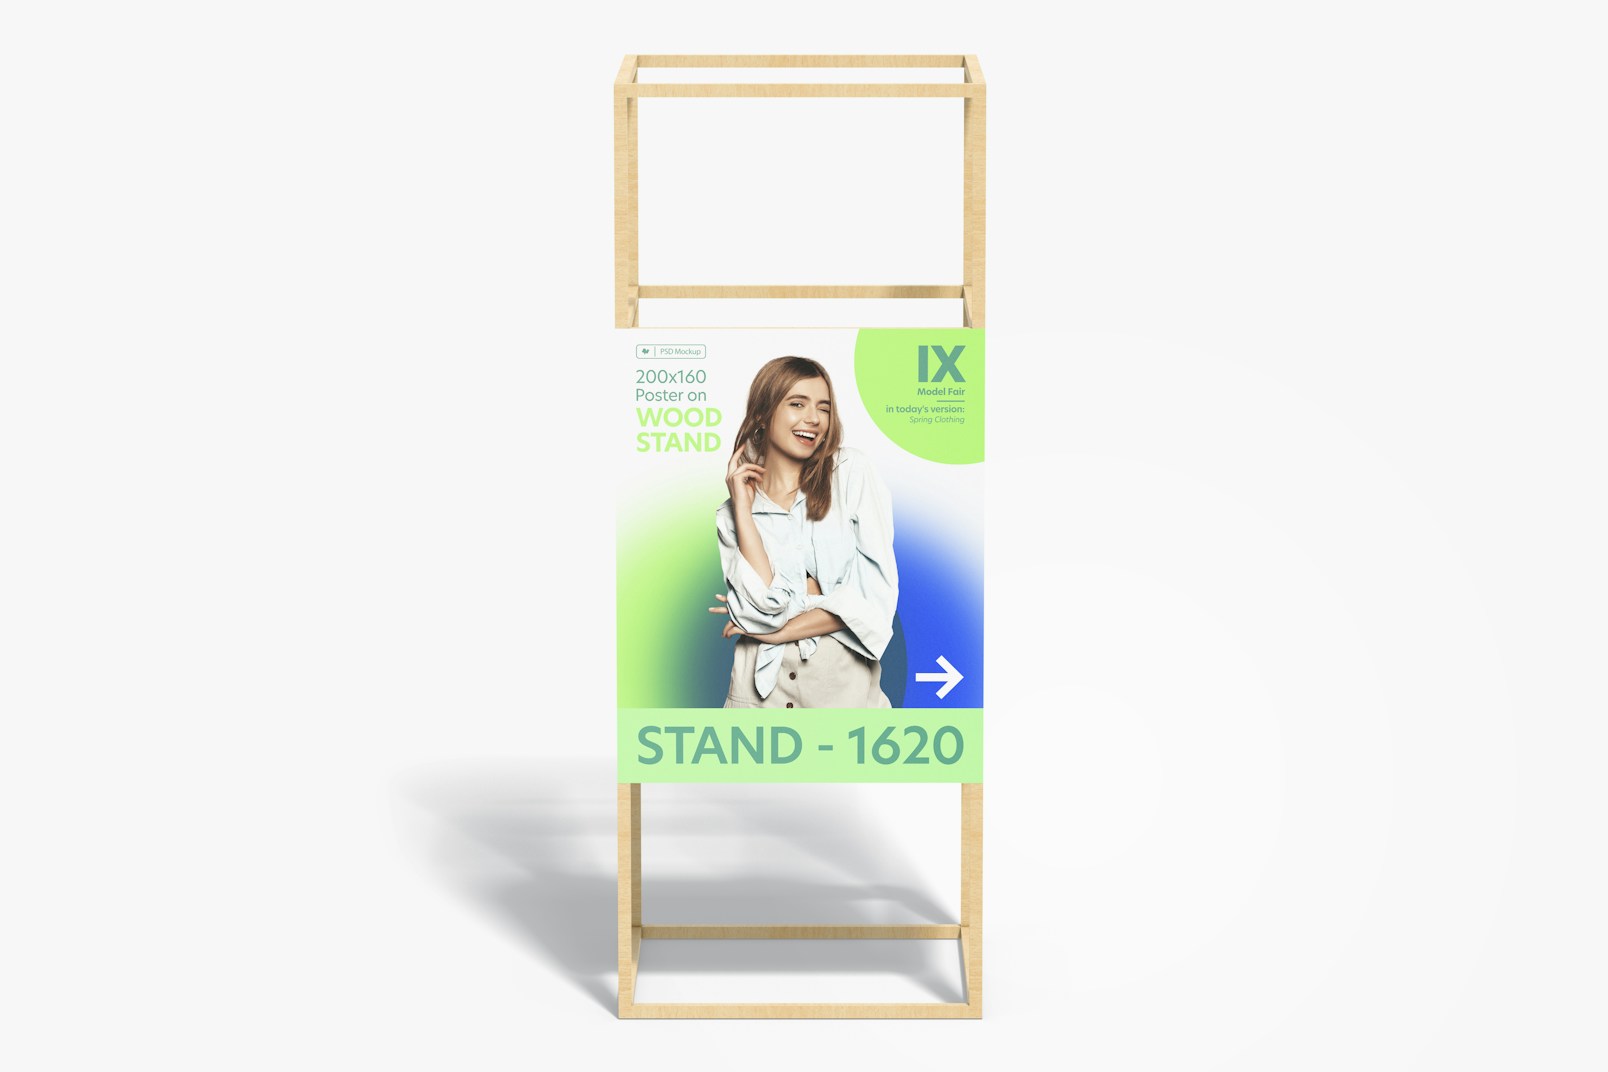 200x160 Poster on Wood Stand Mockup, Front View